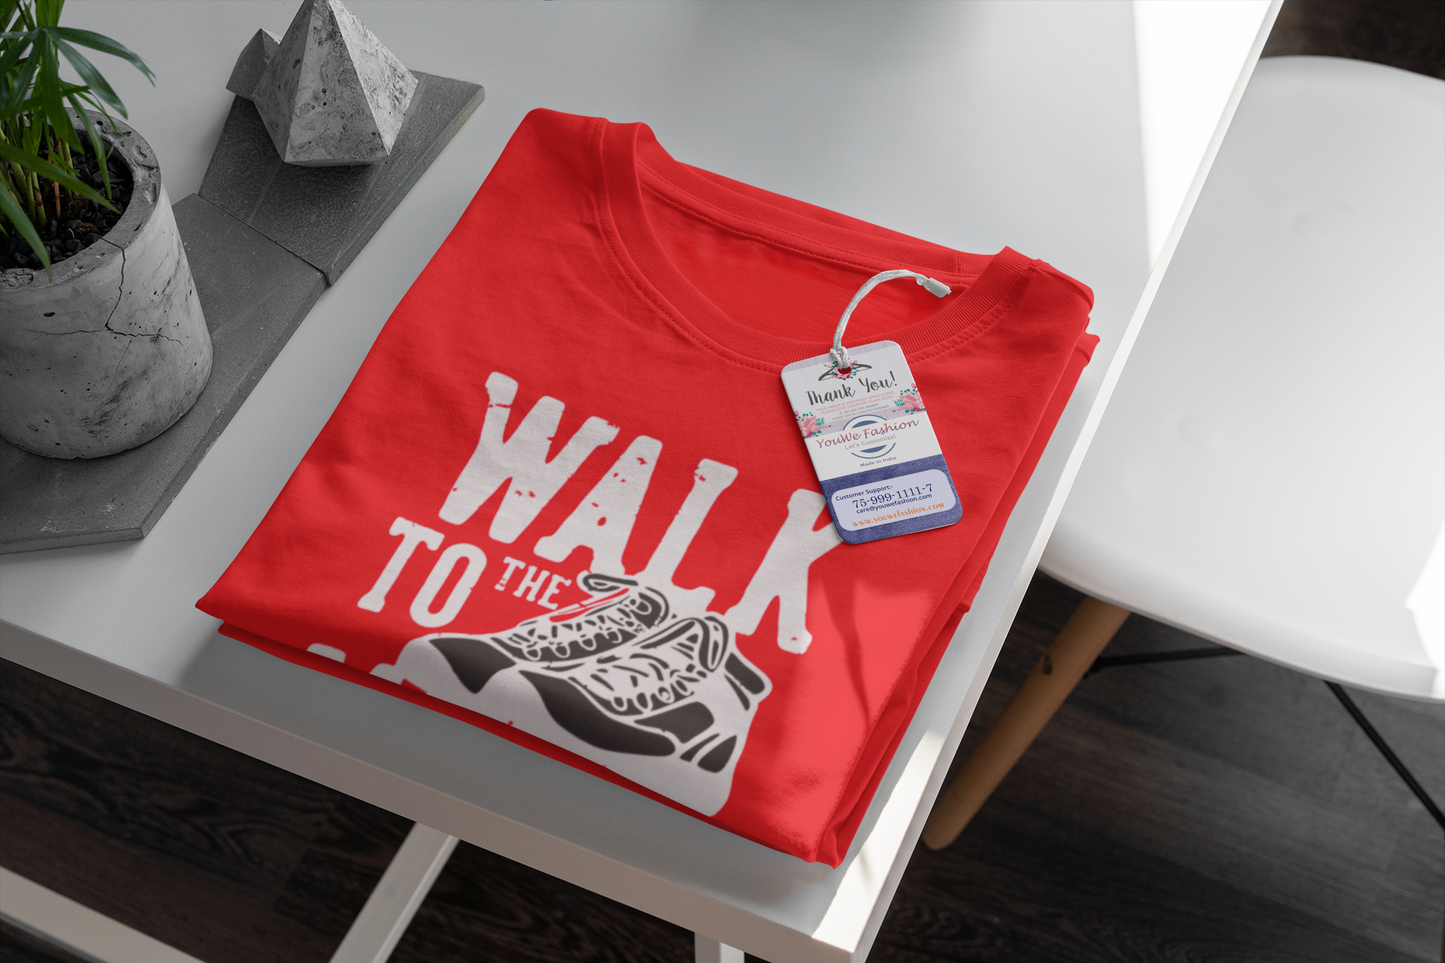 YouWe Fashion "Walk to Wild" Red Cotton T-Shirt for Youth (S-XL)